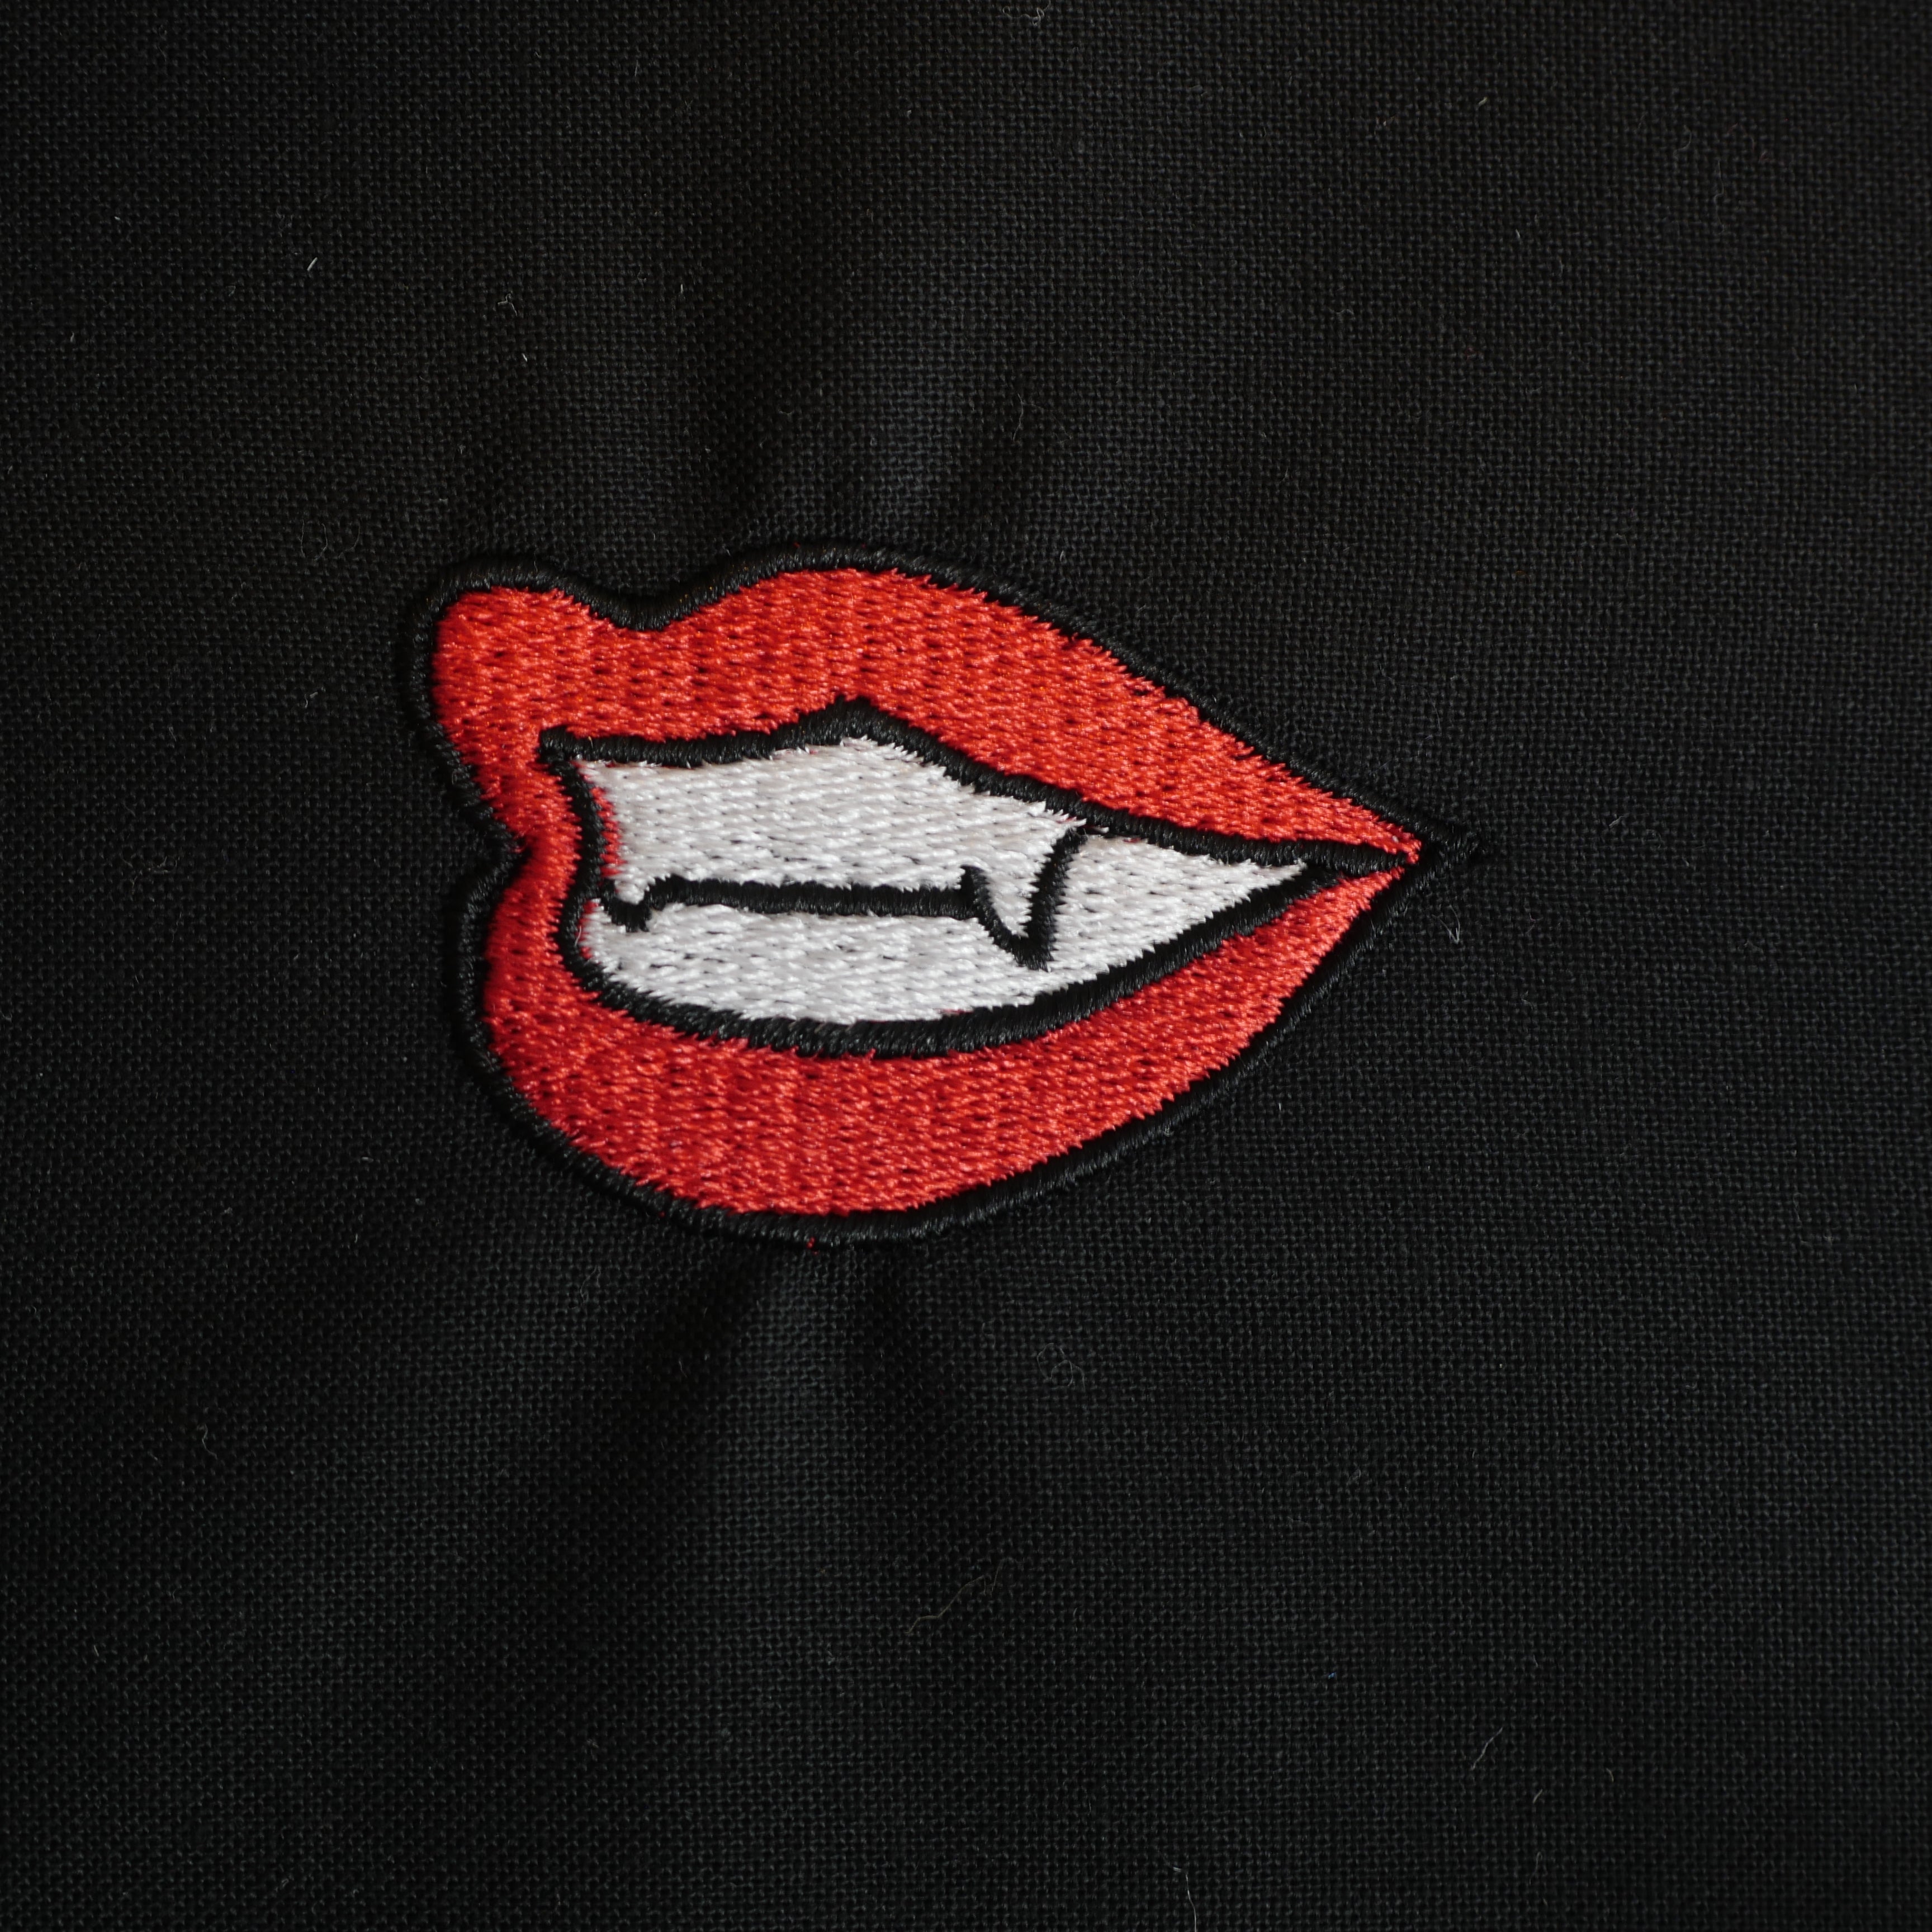 Fang Teeth Embroidery Design